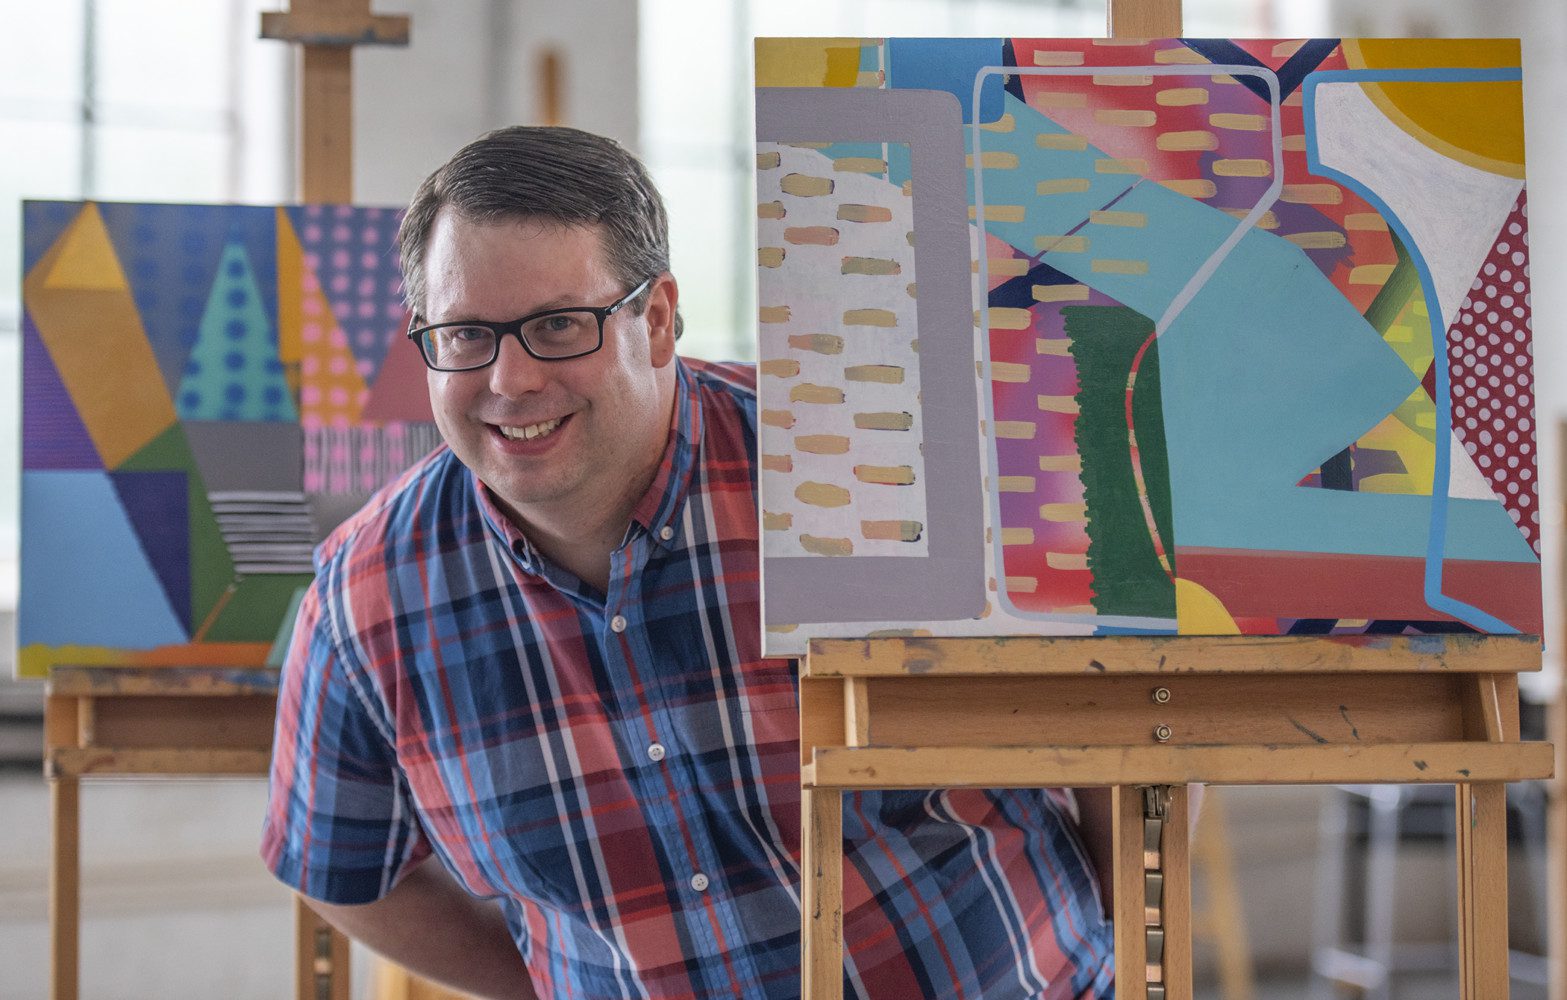 A man wearing a plaid shirt stands next to three easels holding colorful abstract paintings